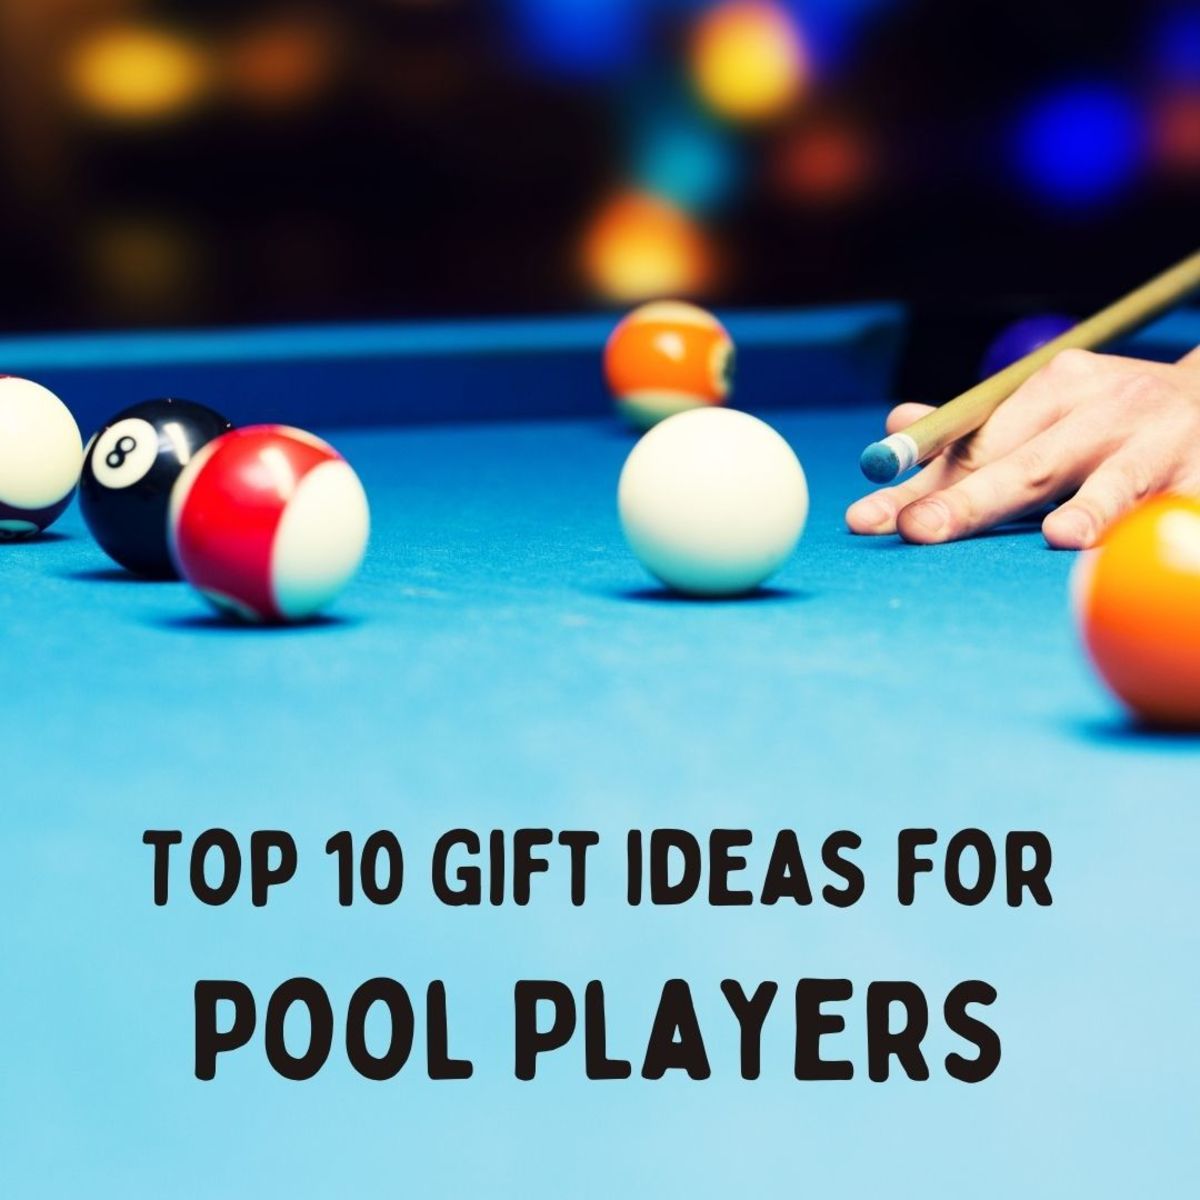 Explore 10 awesome gift ideas for the pool player in your life!